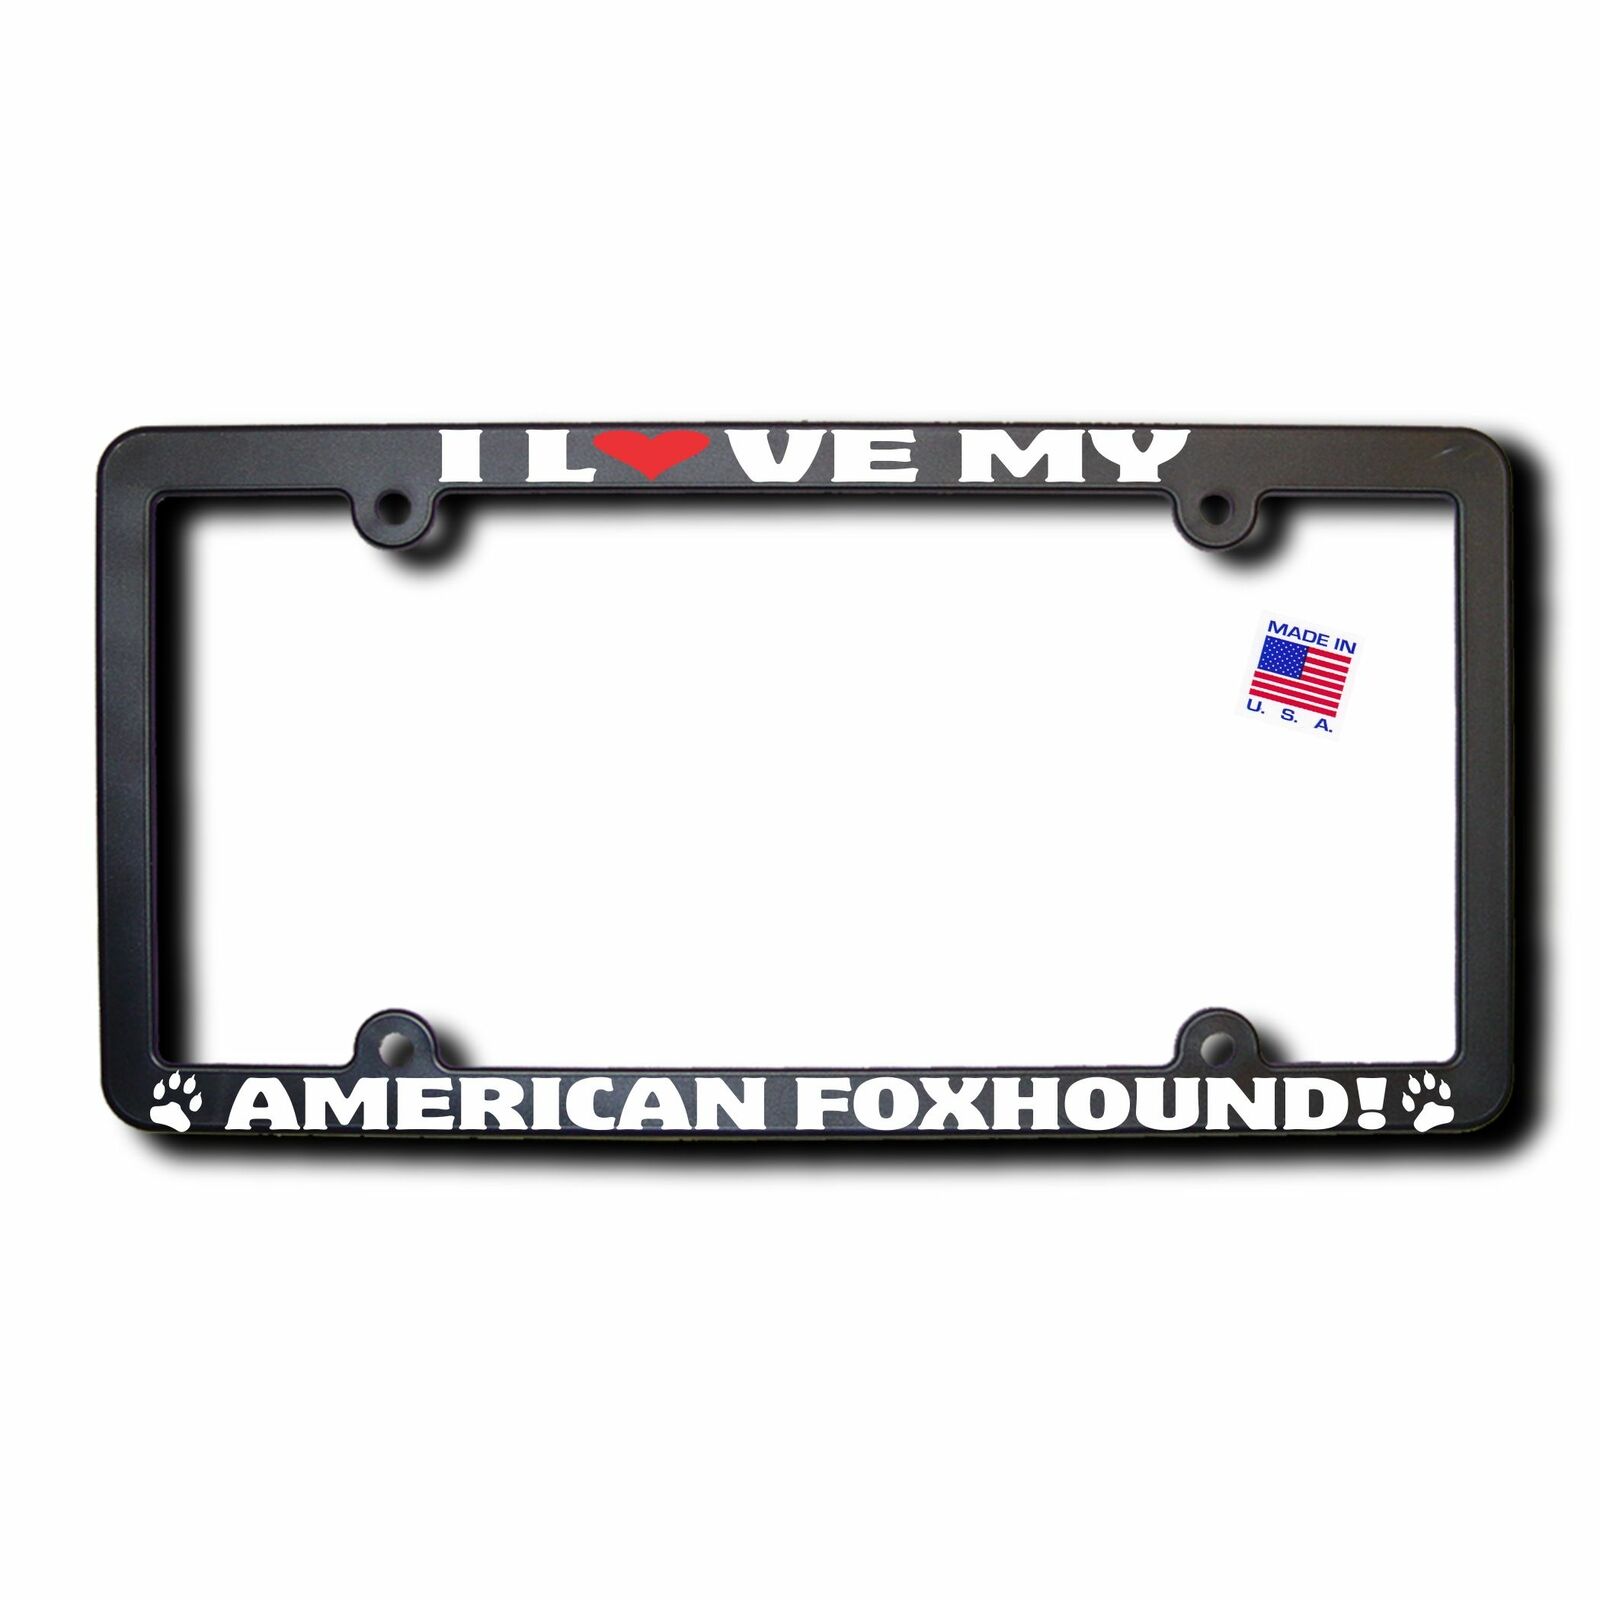 I Love My AMERICAN FOXHOUND License Frame w/Reflective Text